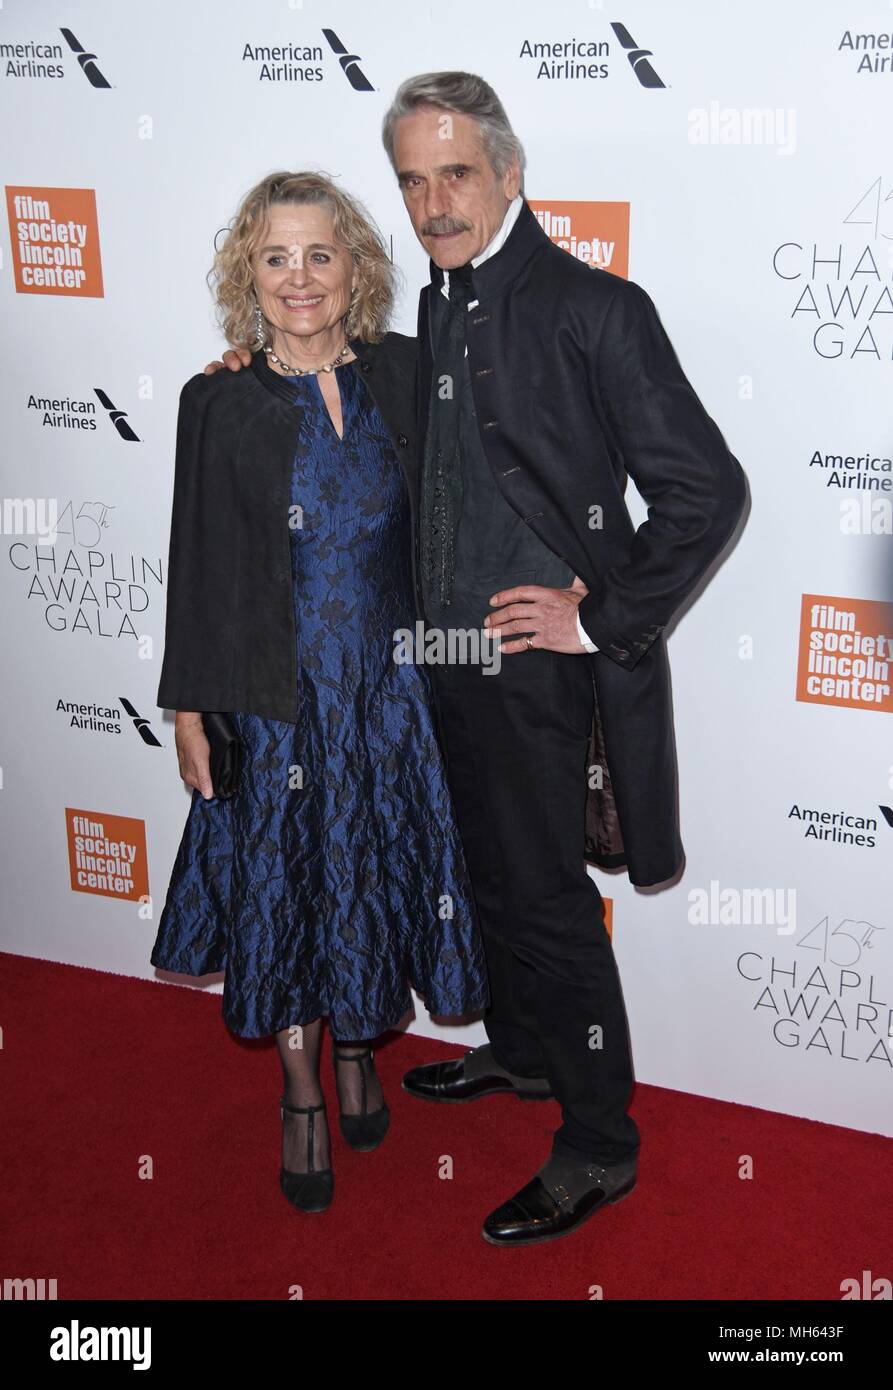 New York, NY, USA. 30th Apr, 2018. Sinead Cusack, Jeremy Irons at arrivals for Film Society of Lincoln Center's 45th Chaplin Award Gala, Alice Tully Hall at Linocln Center, New York, NY April 30, 2018. Credit: Derek Storm/Everett Collection/Alamy Live News Stock Photo